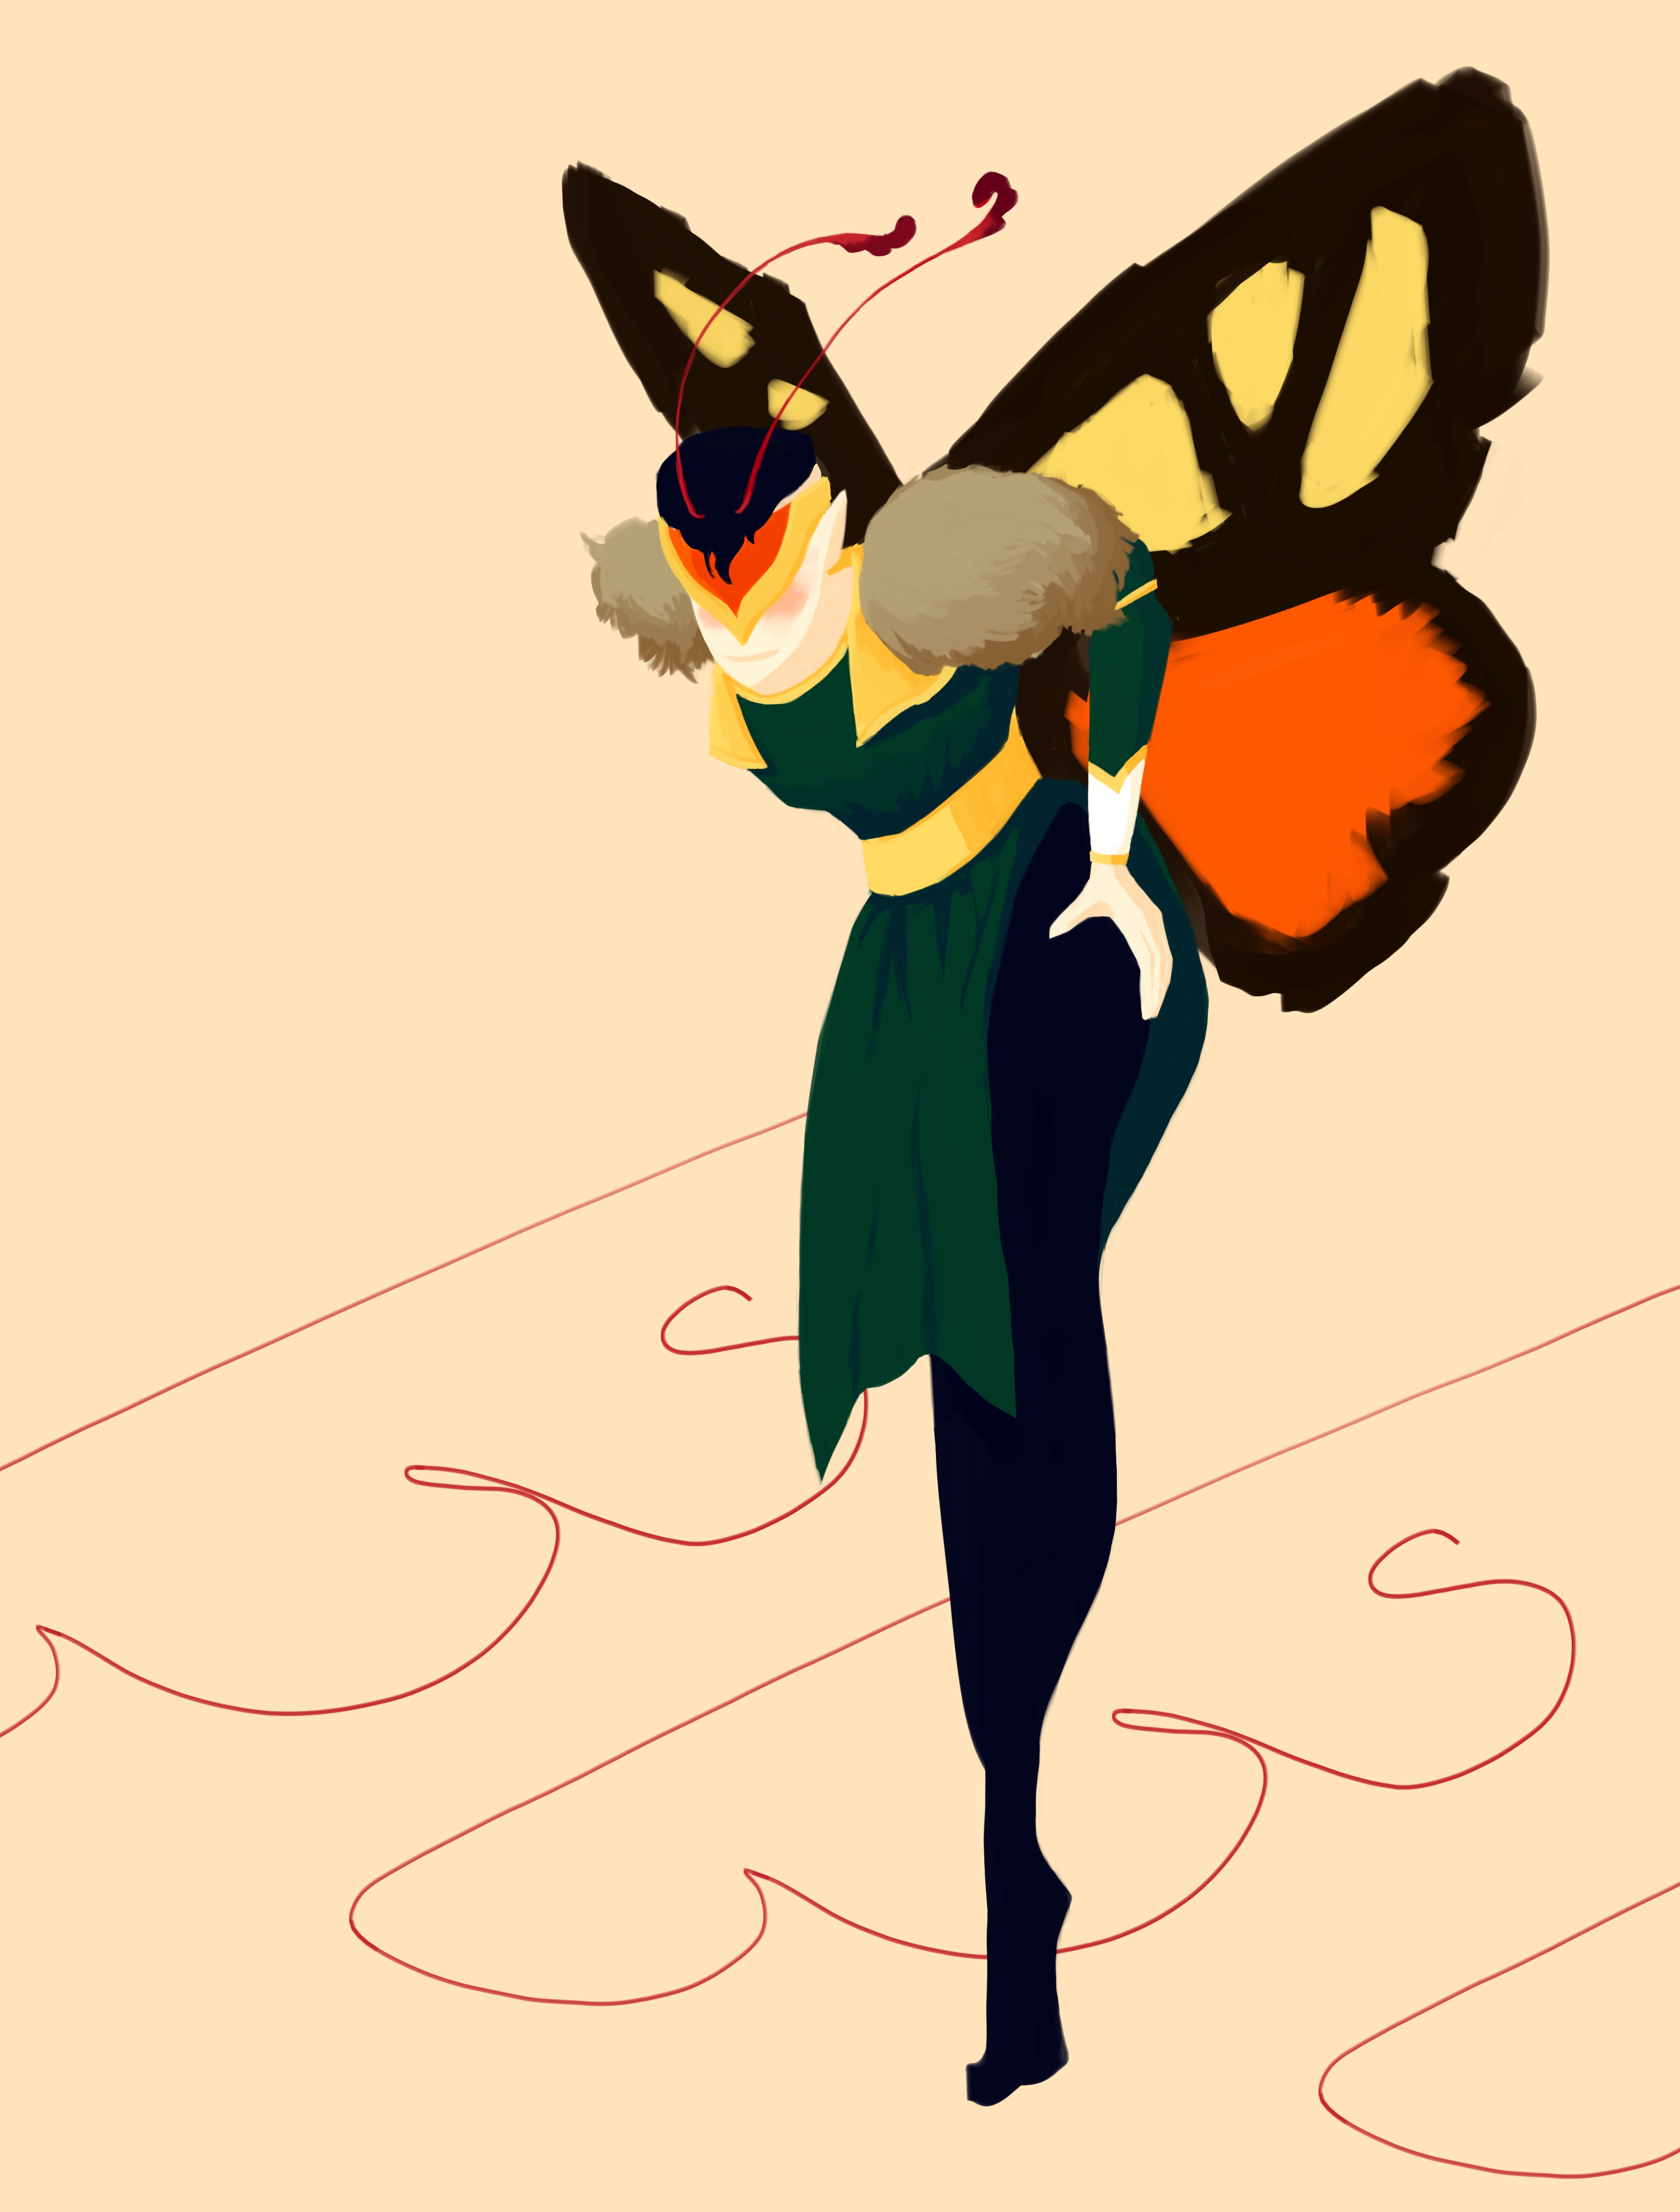 A moth fairy wearing a green tunic in a whimsical pose